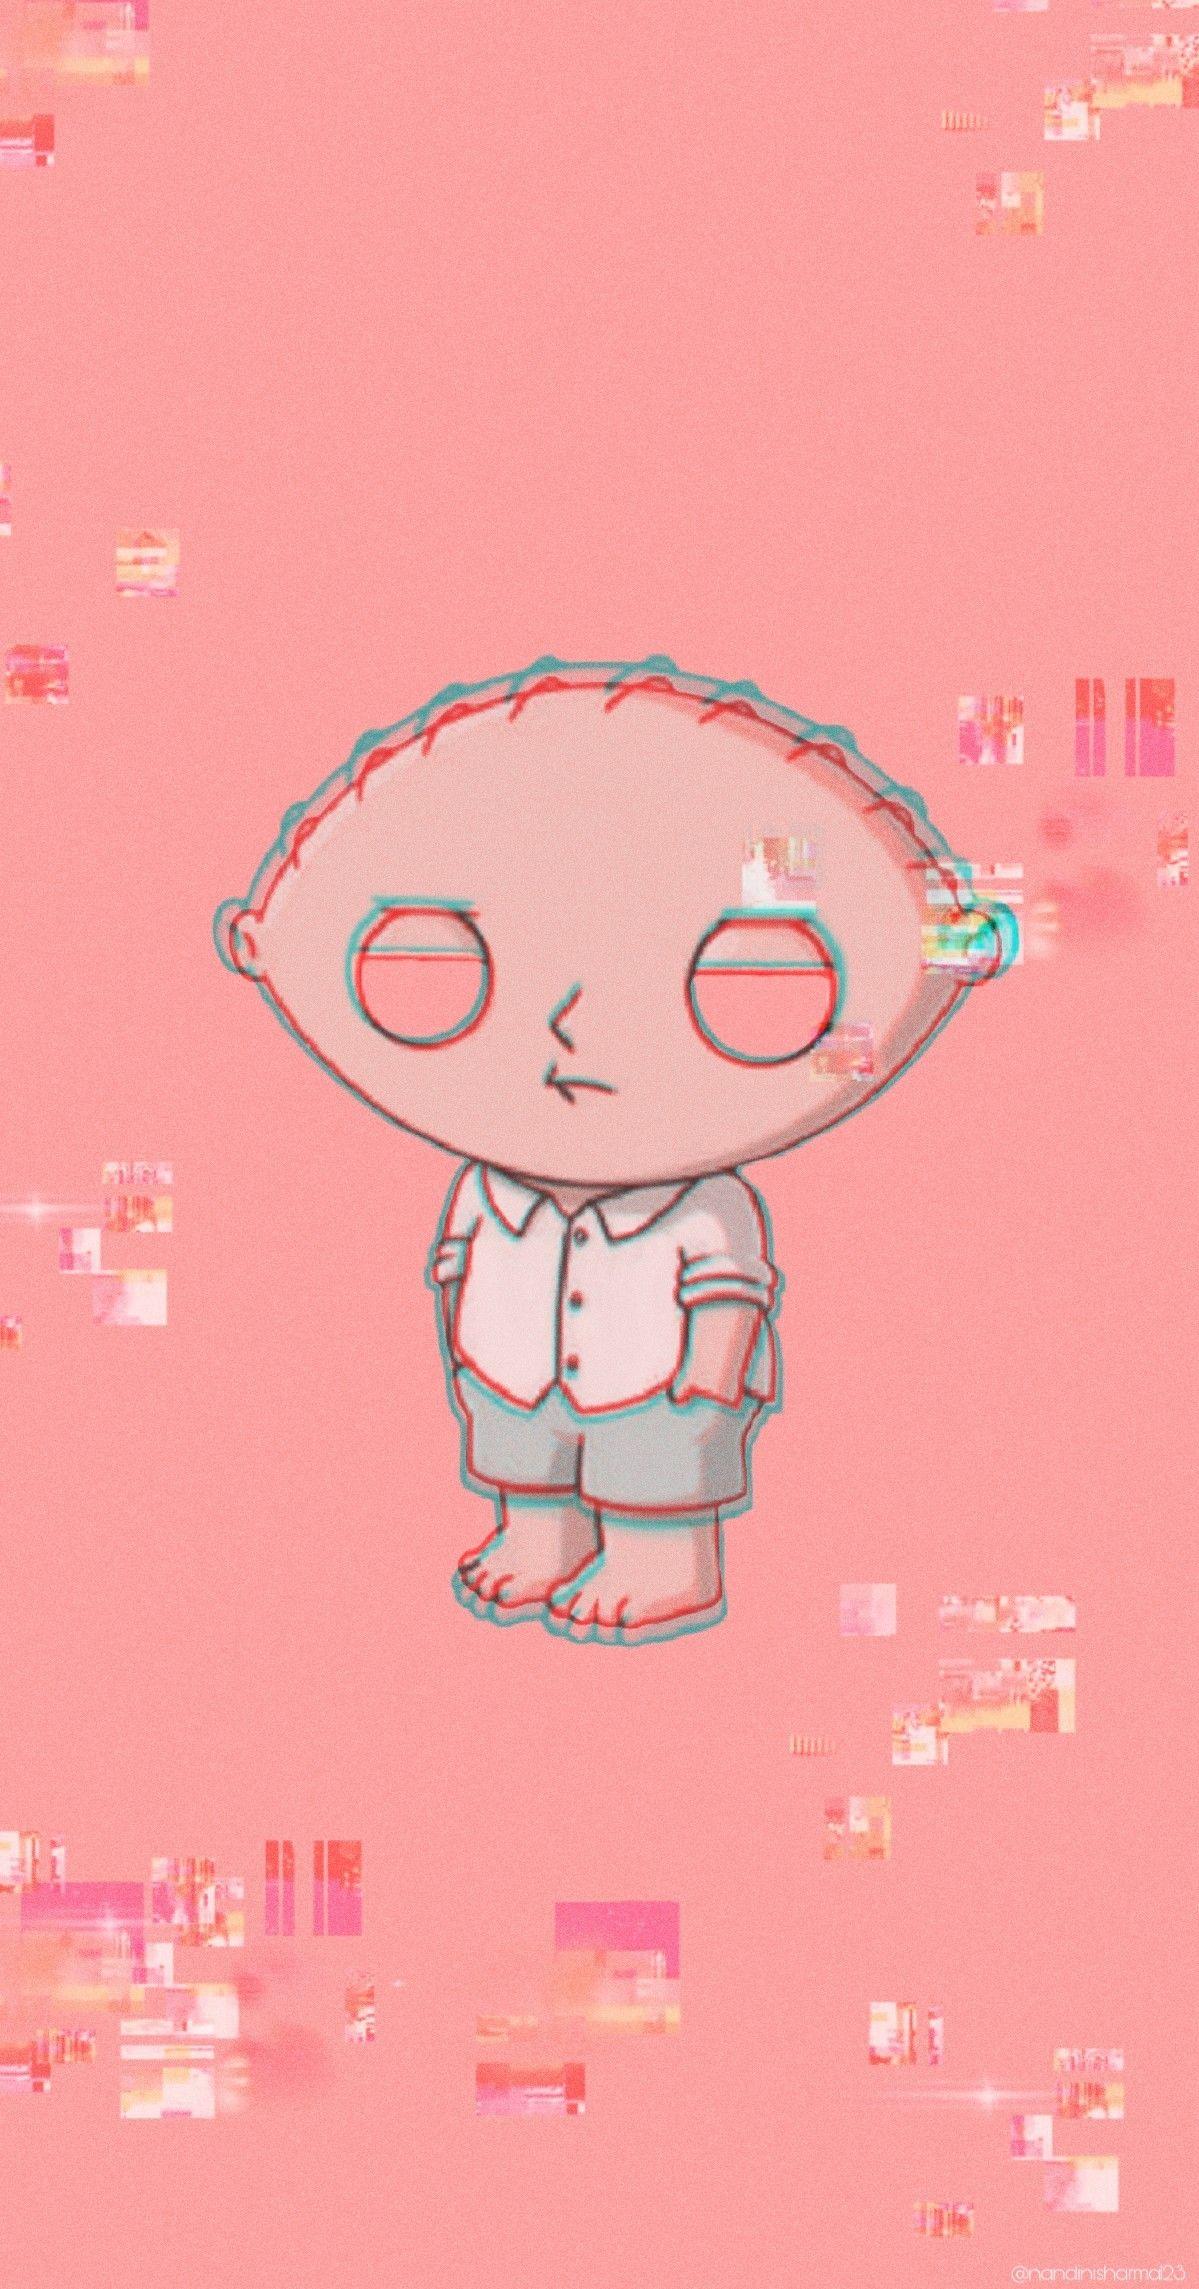 Family guy stewie wallpaper by -ig- nandinisharma123. Family guy stewie, Cartoon wallpaper, Family guy cartoon